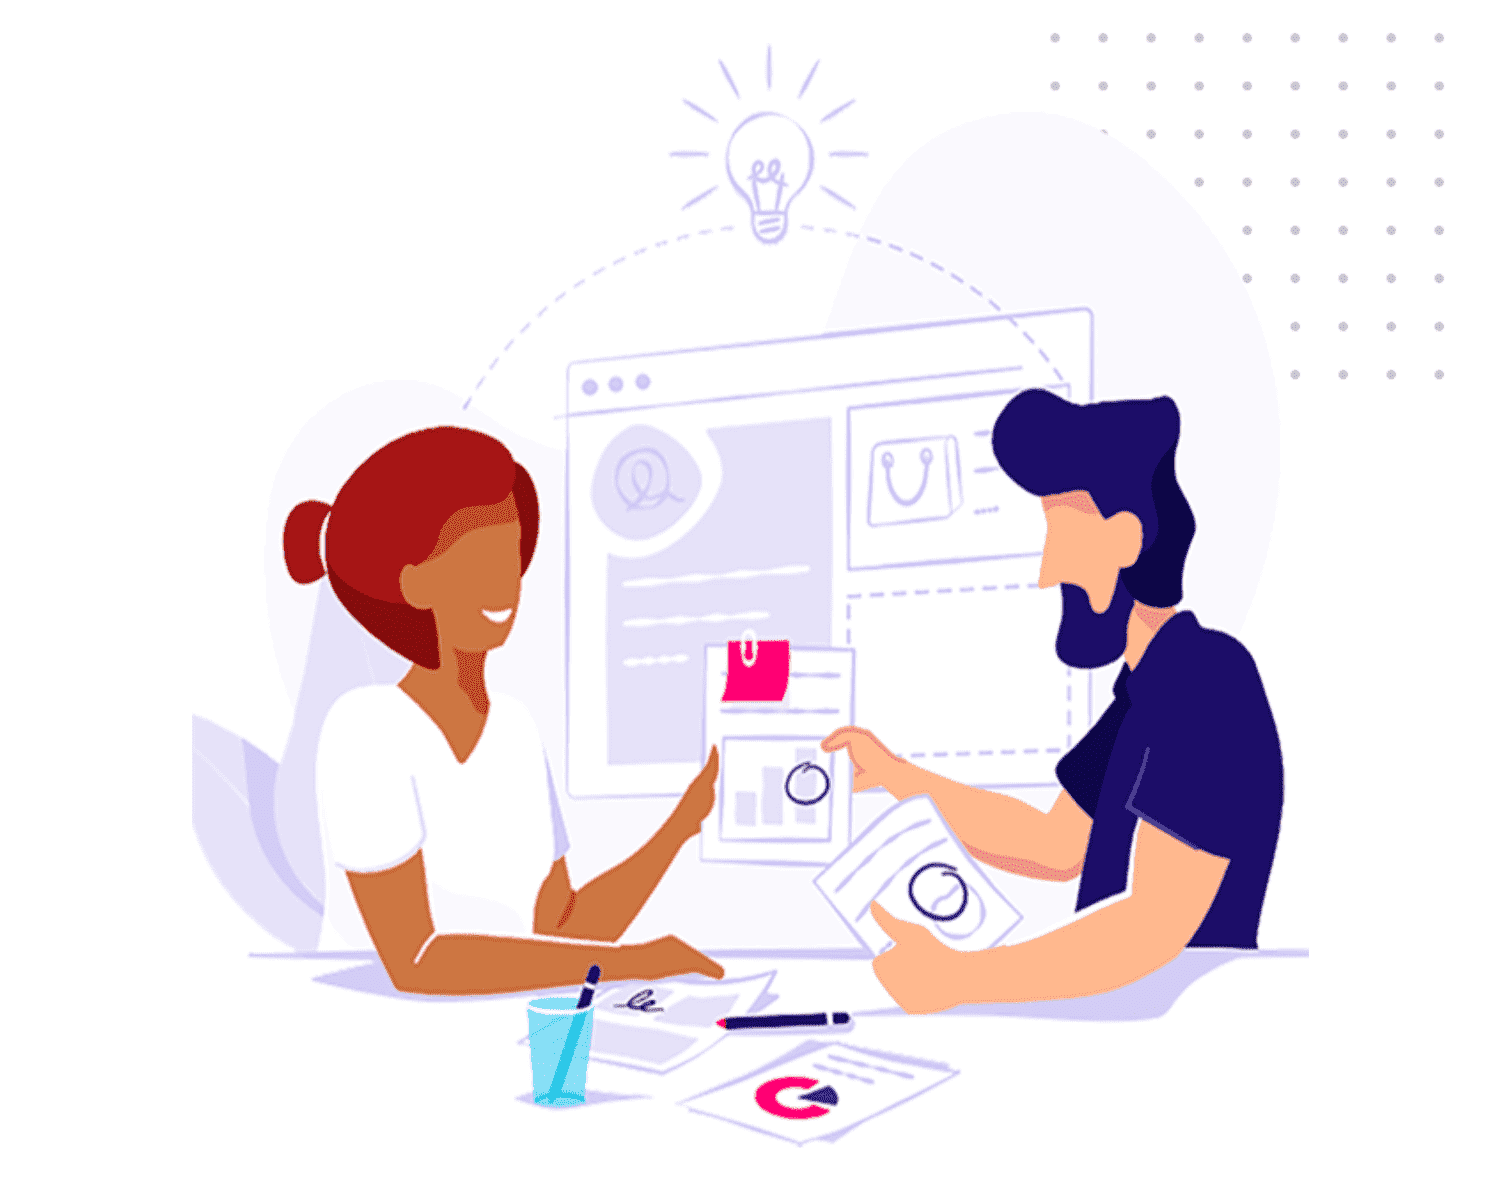 An illustration of a one-on-one coaching session with a Zoho certified consultant and a Zoho customer